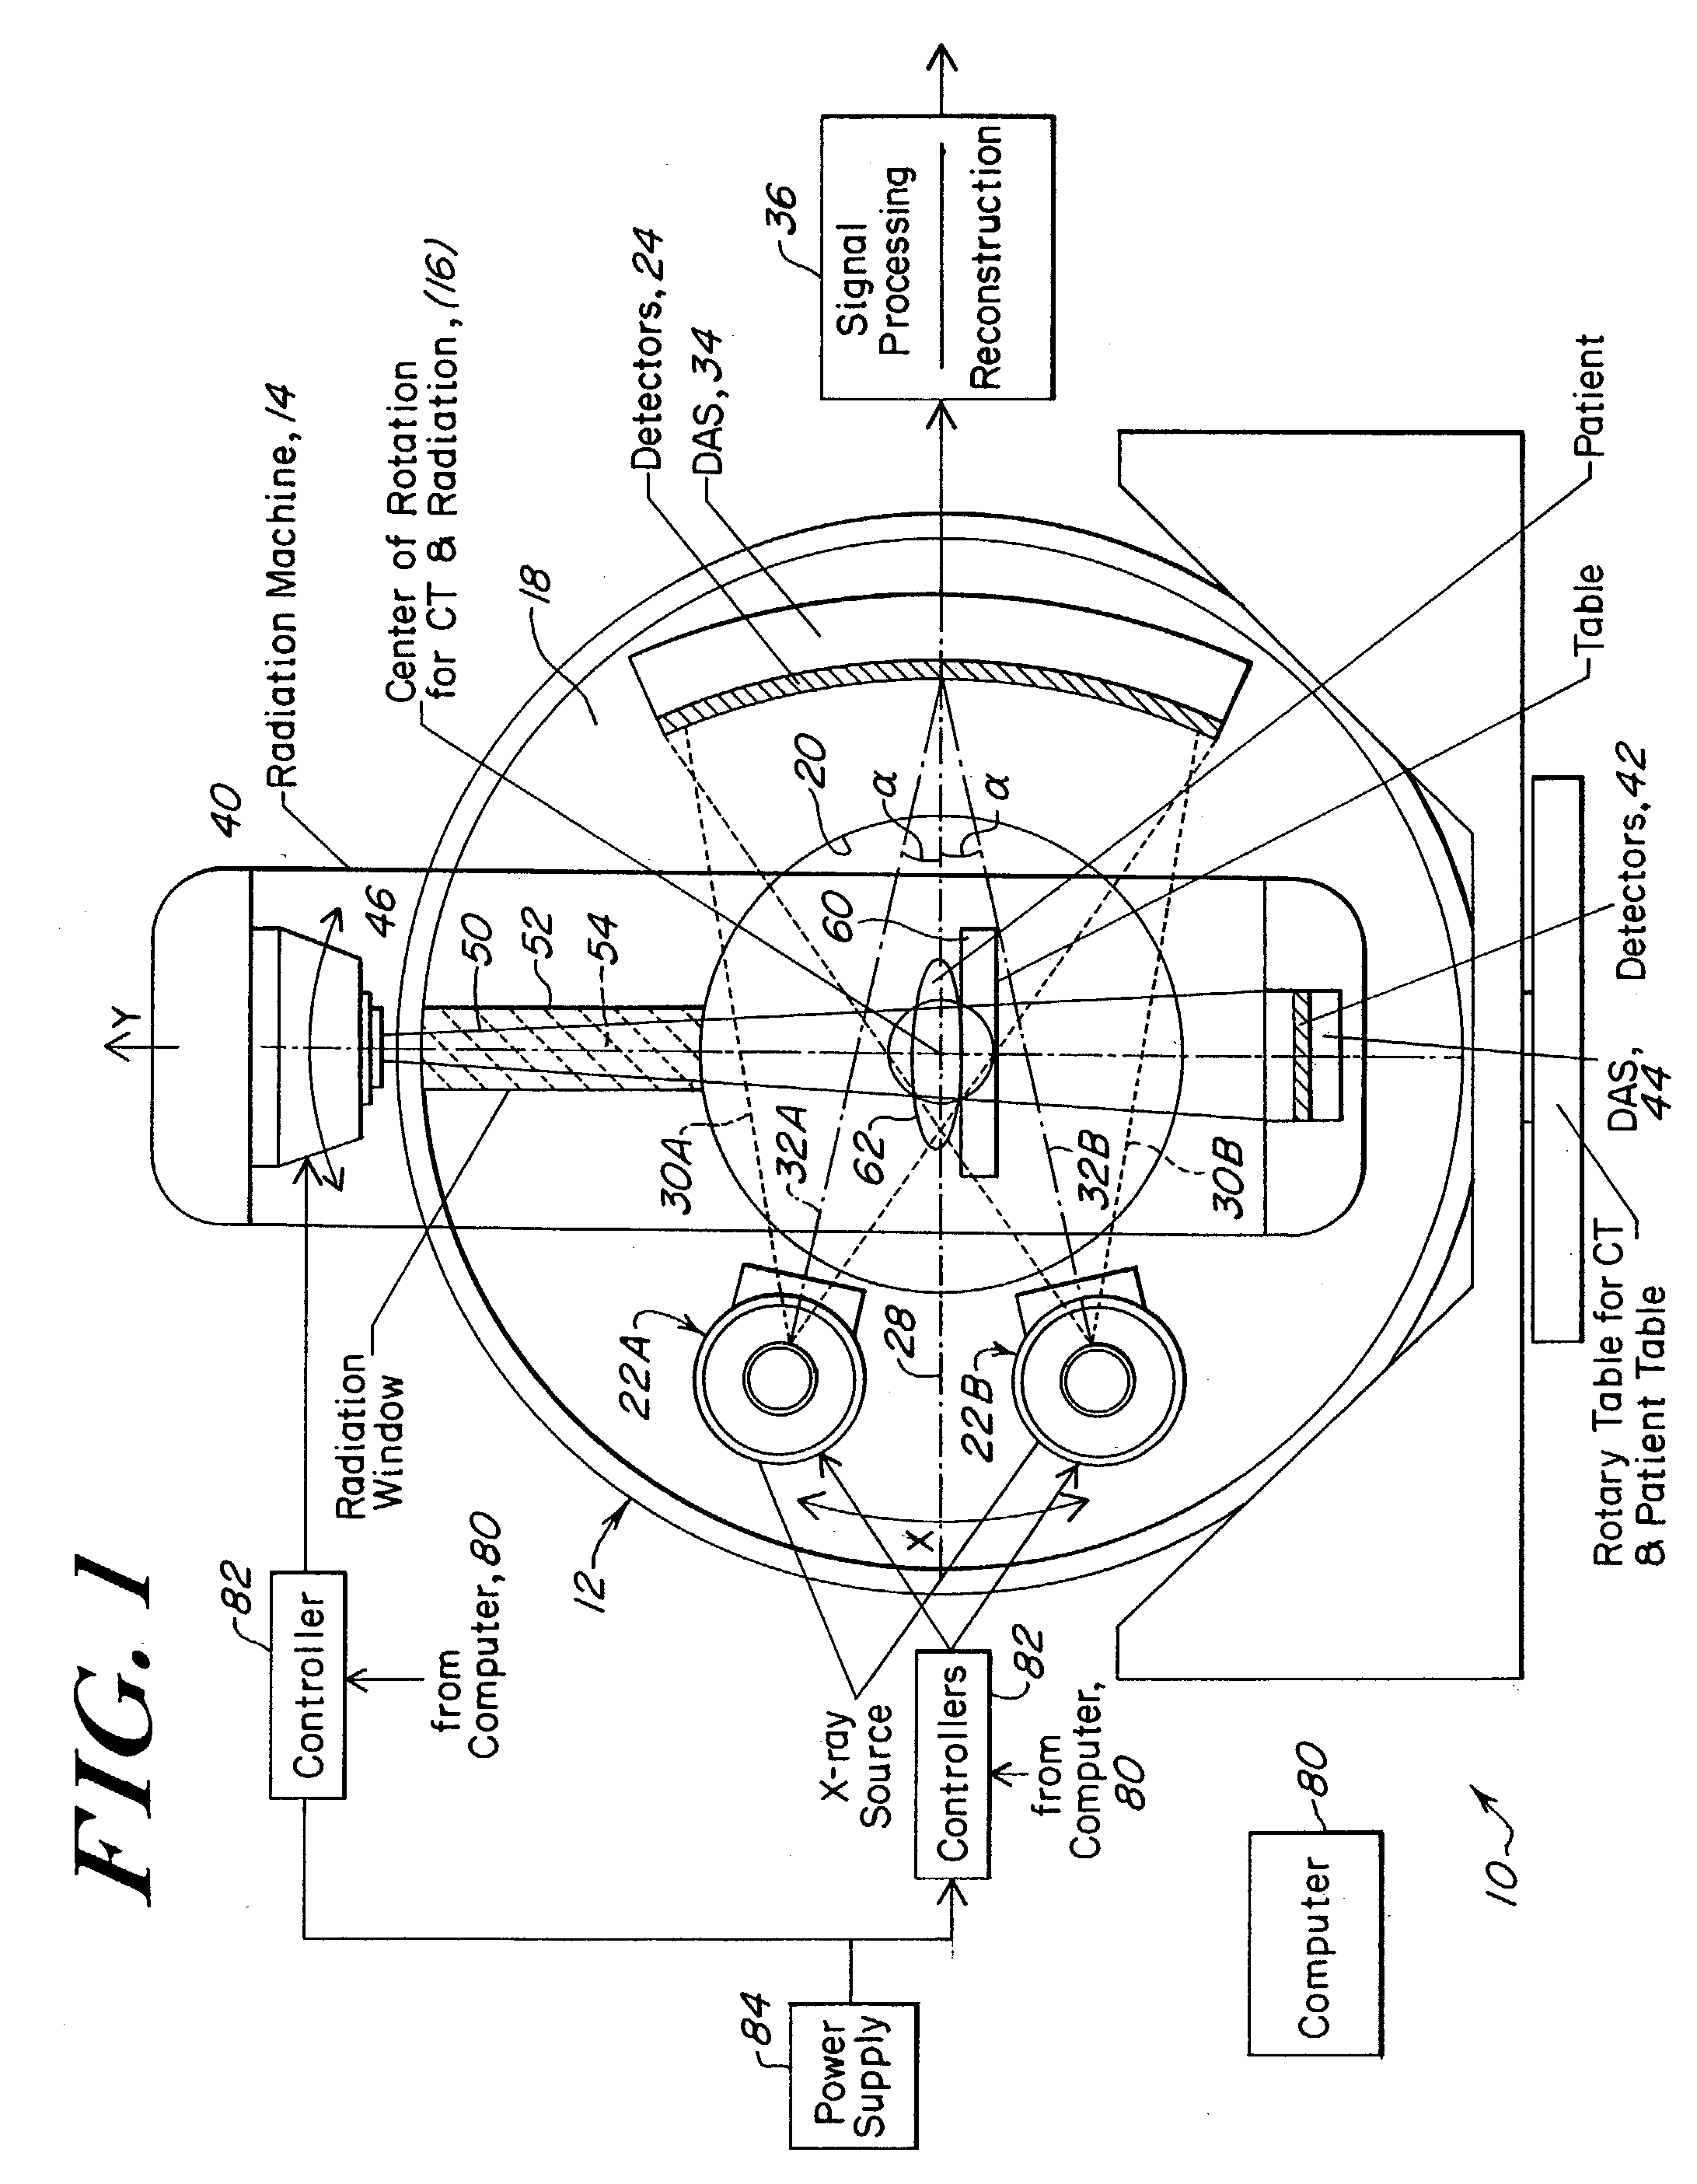 Combined radiation therapy and imaging system and method